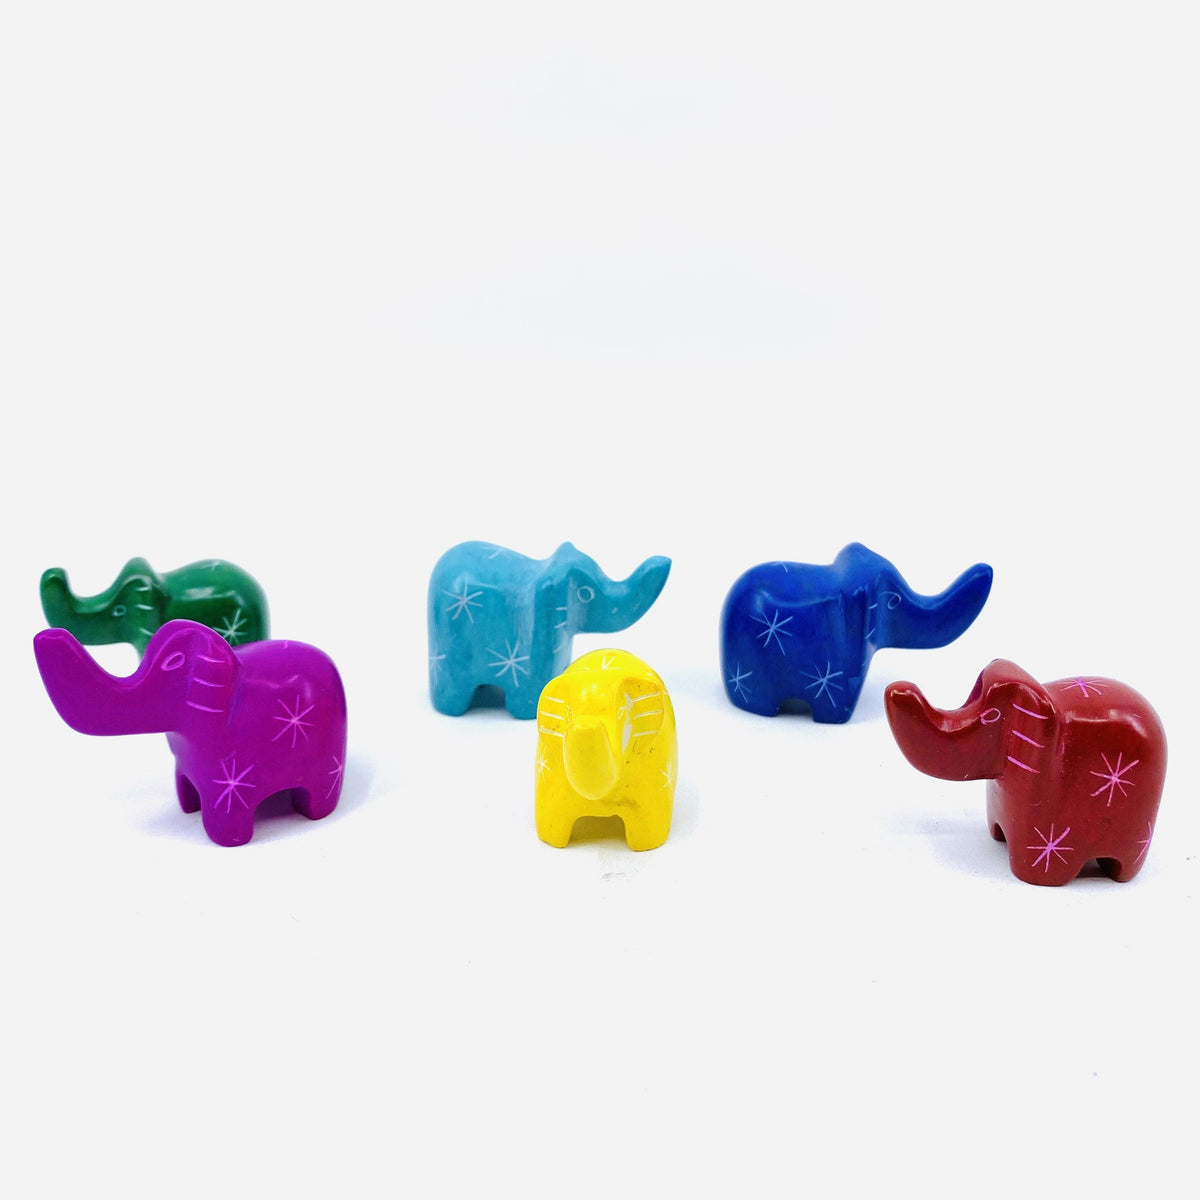 Carved Small Animals, Elephant Venture Imports 